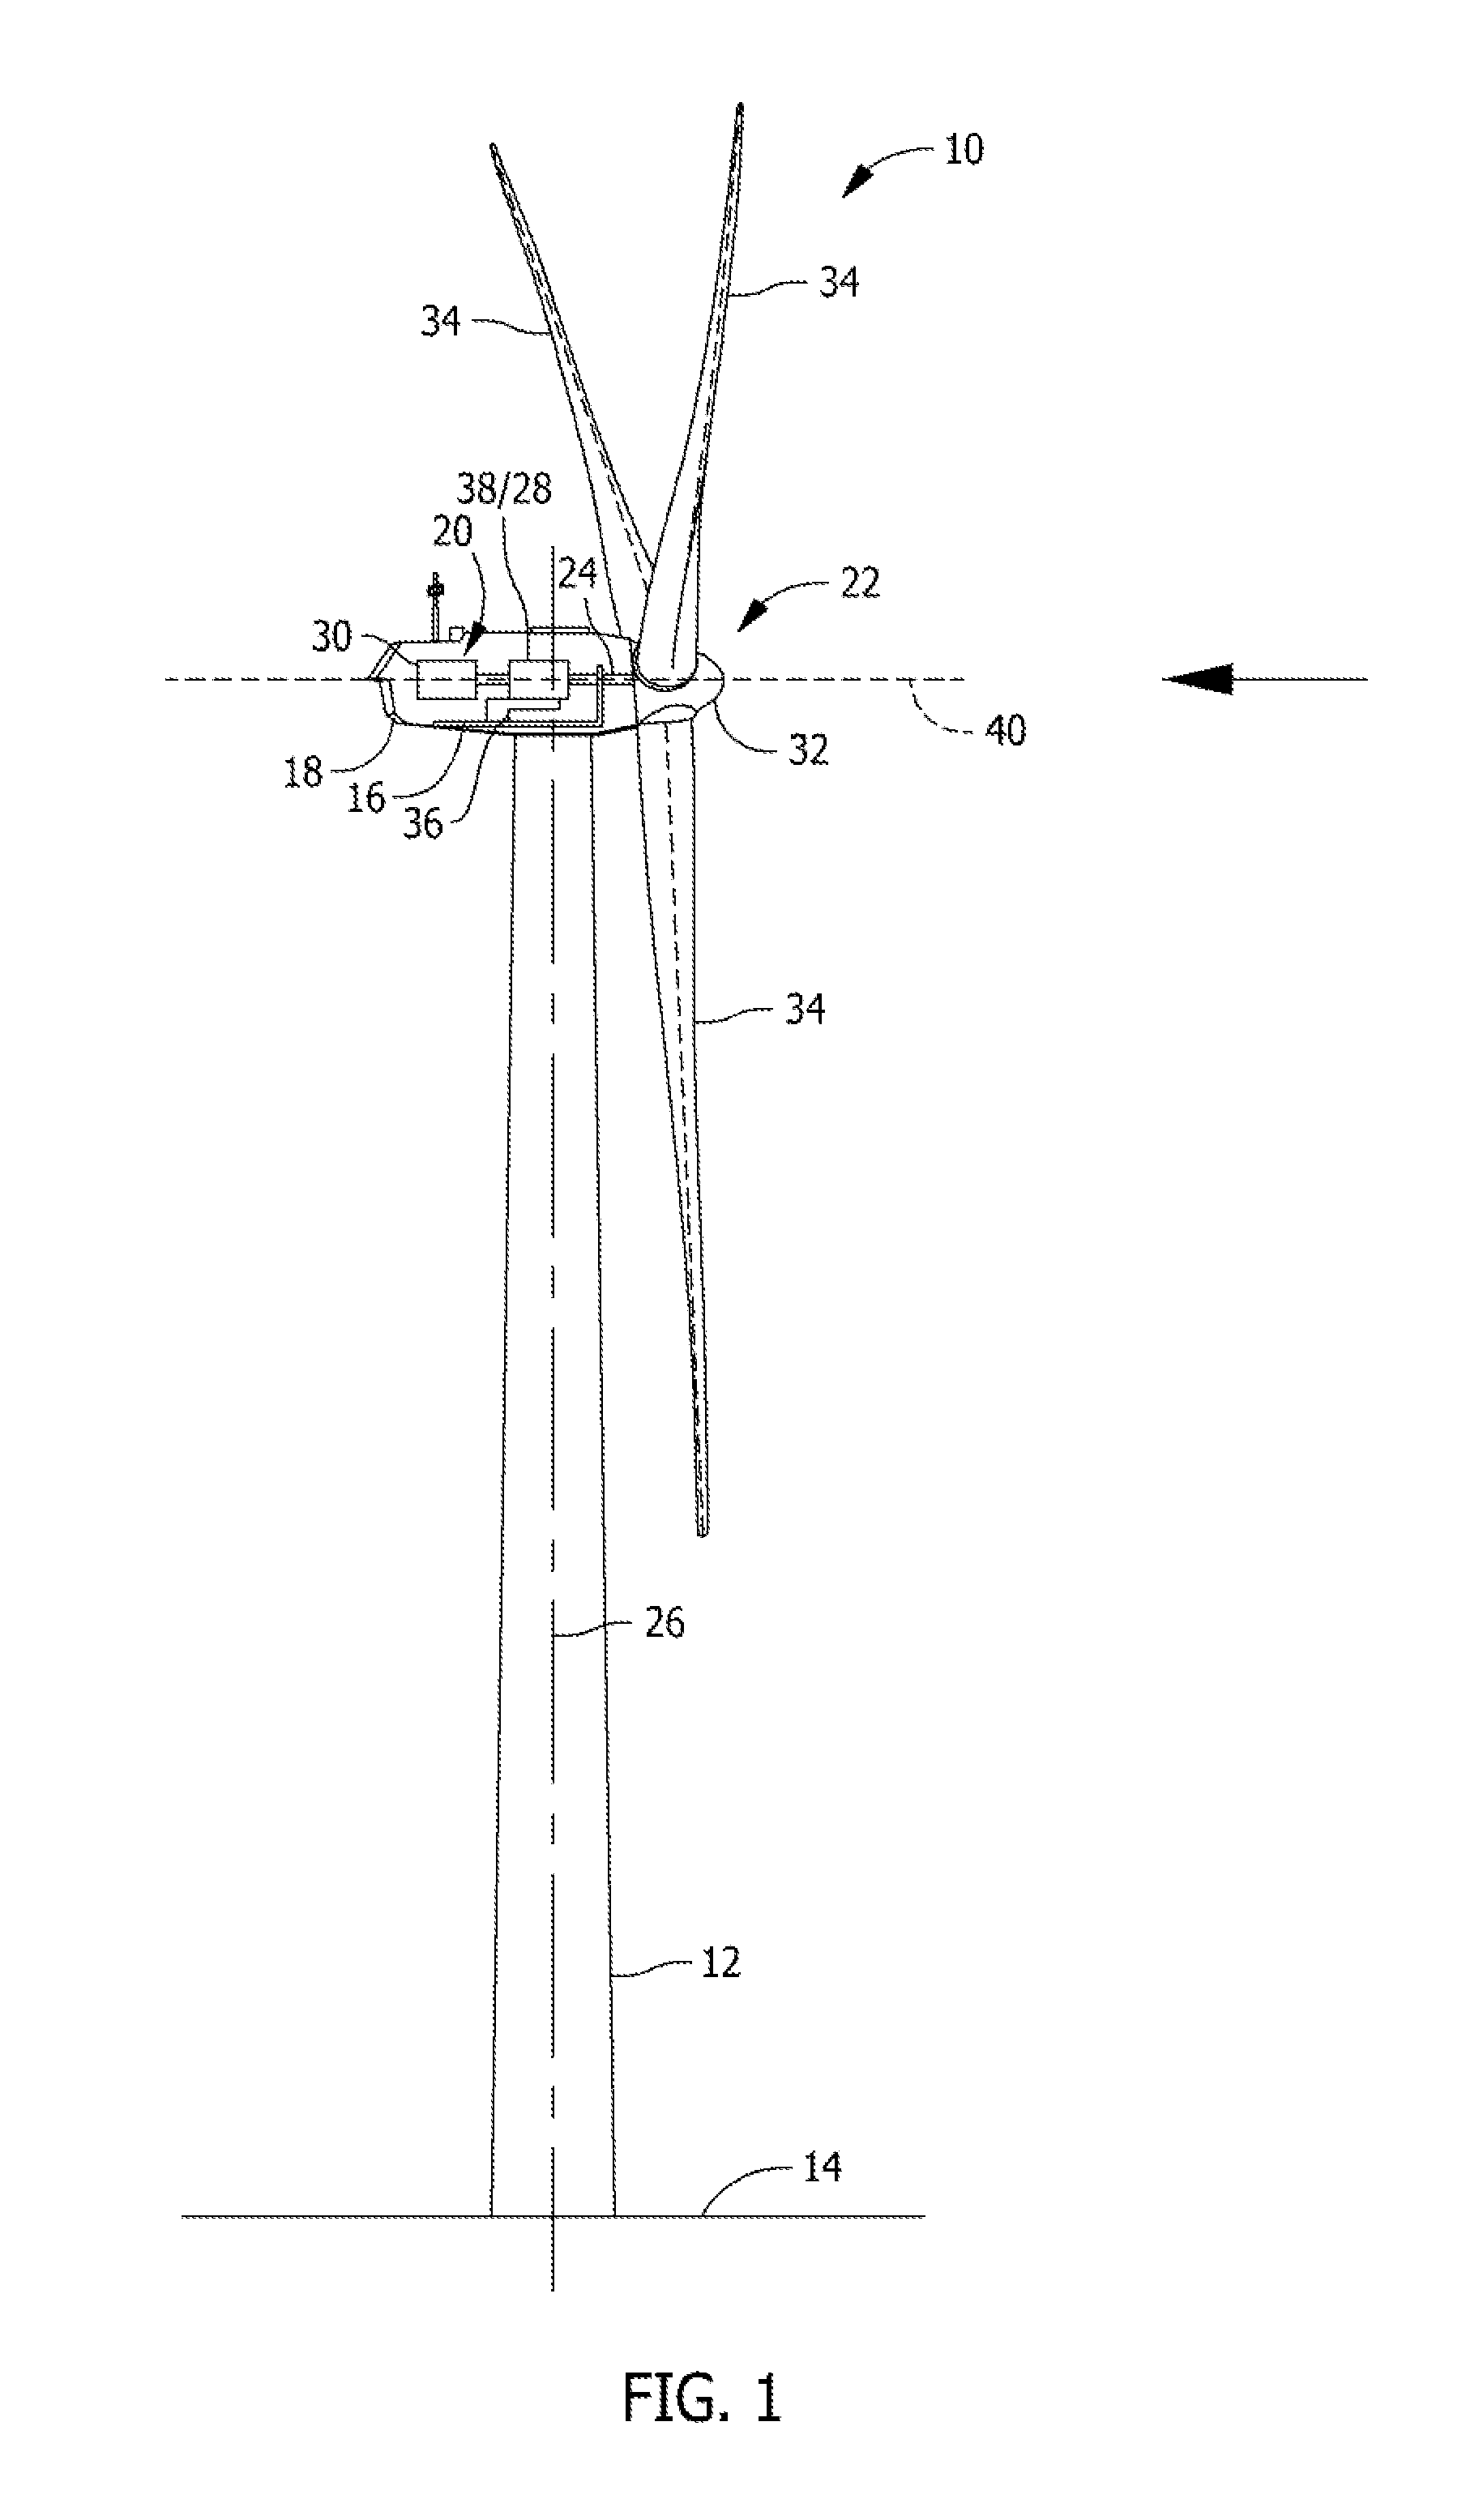 Positioning system for use in wind turbines and methods of positioning a drive train component